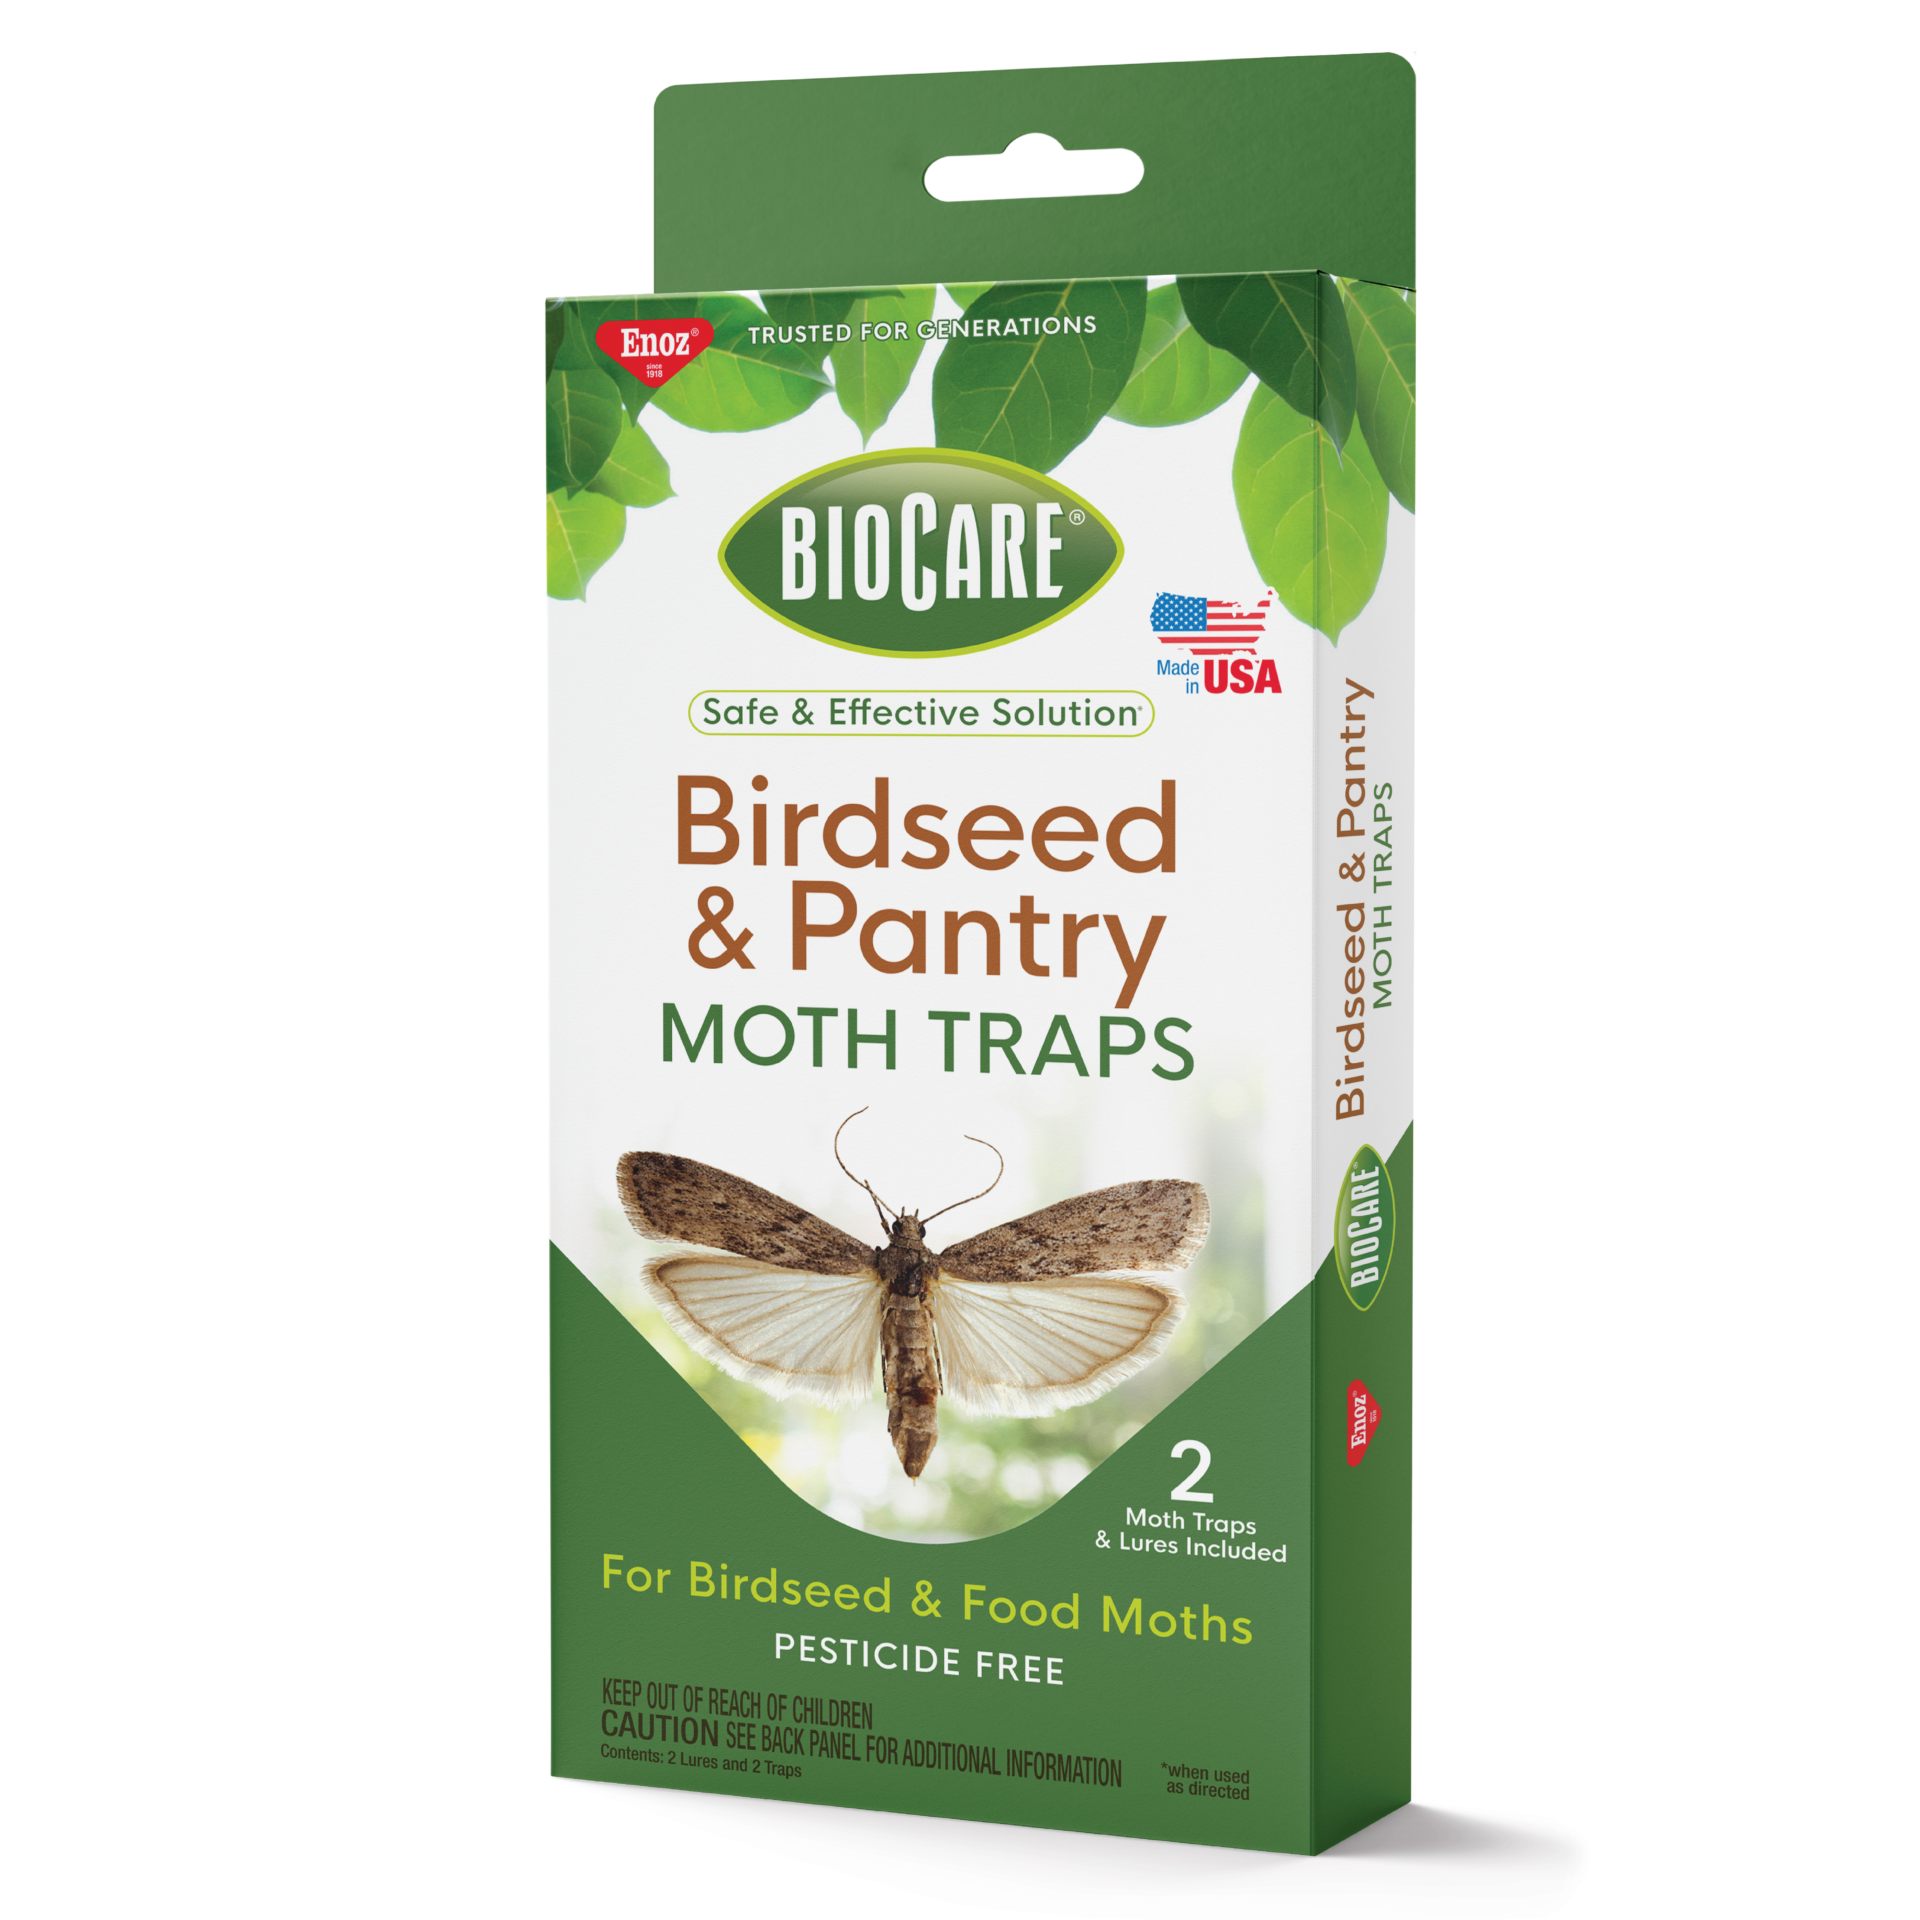 BioCare Birdseed and Pantry Moth Traps